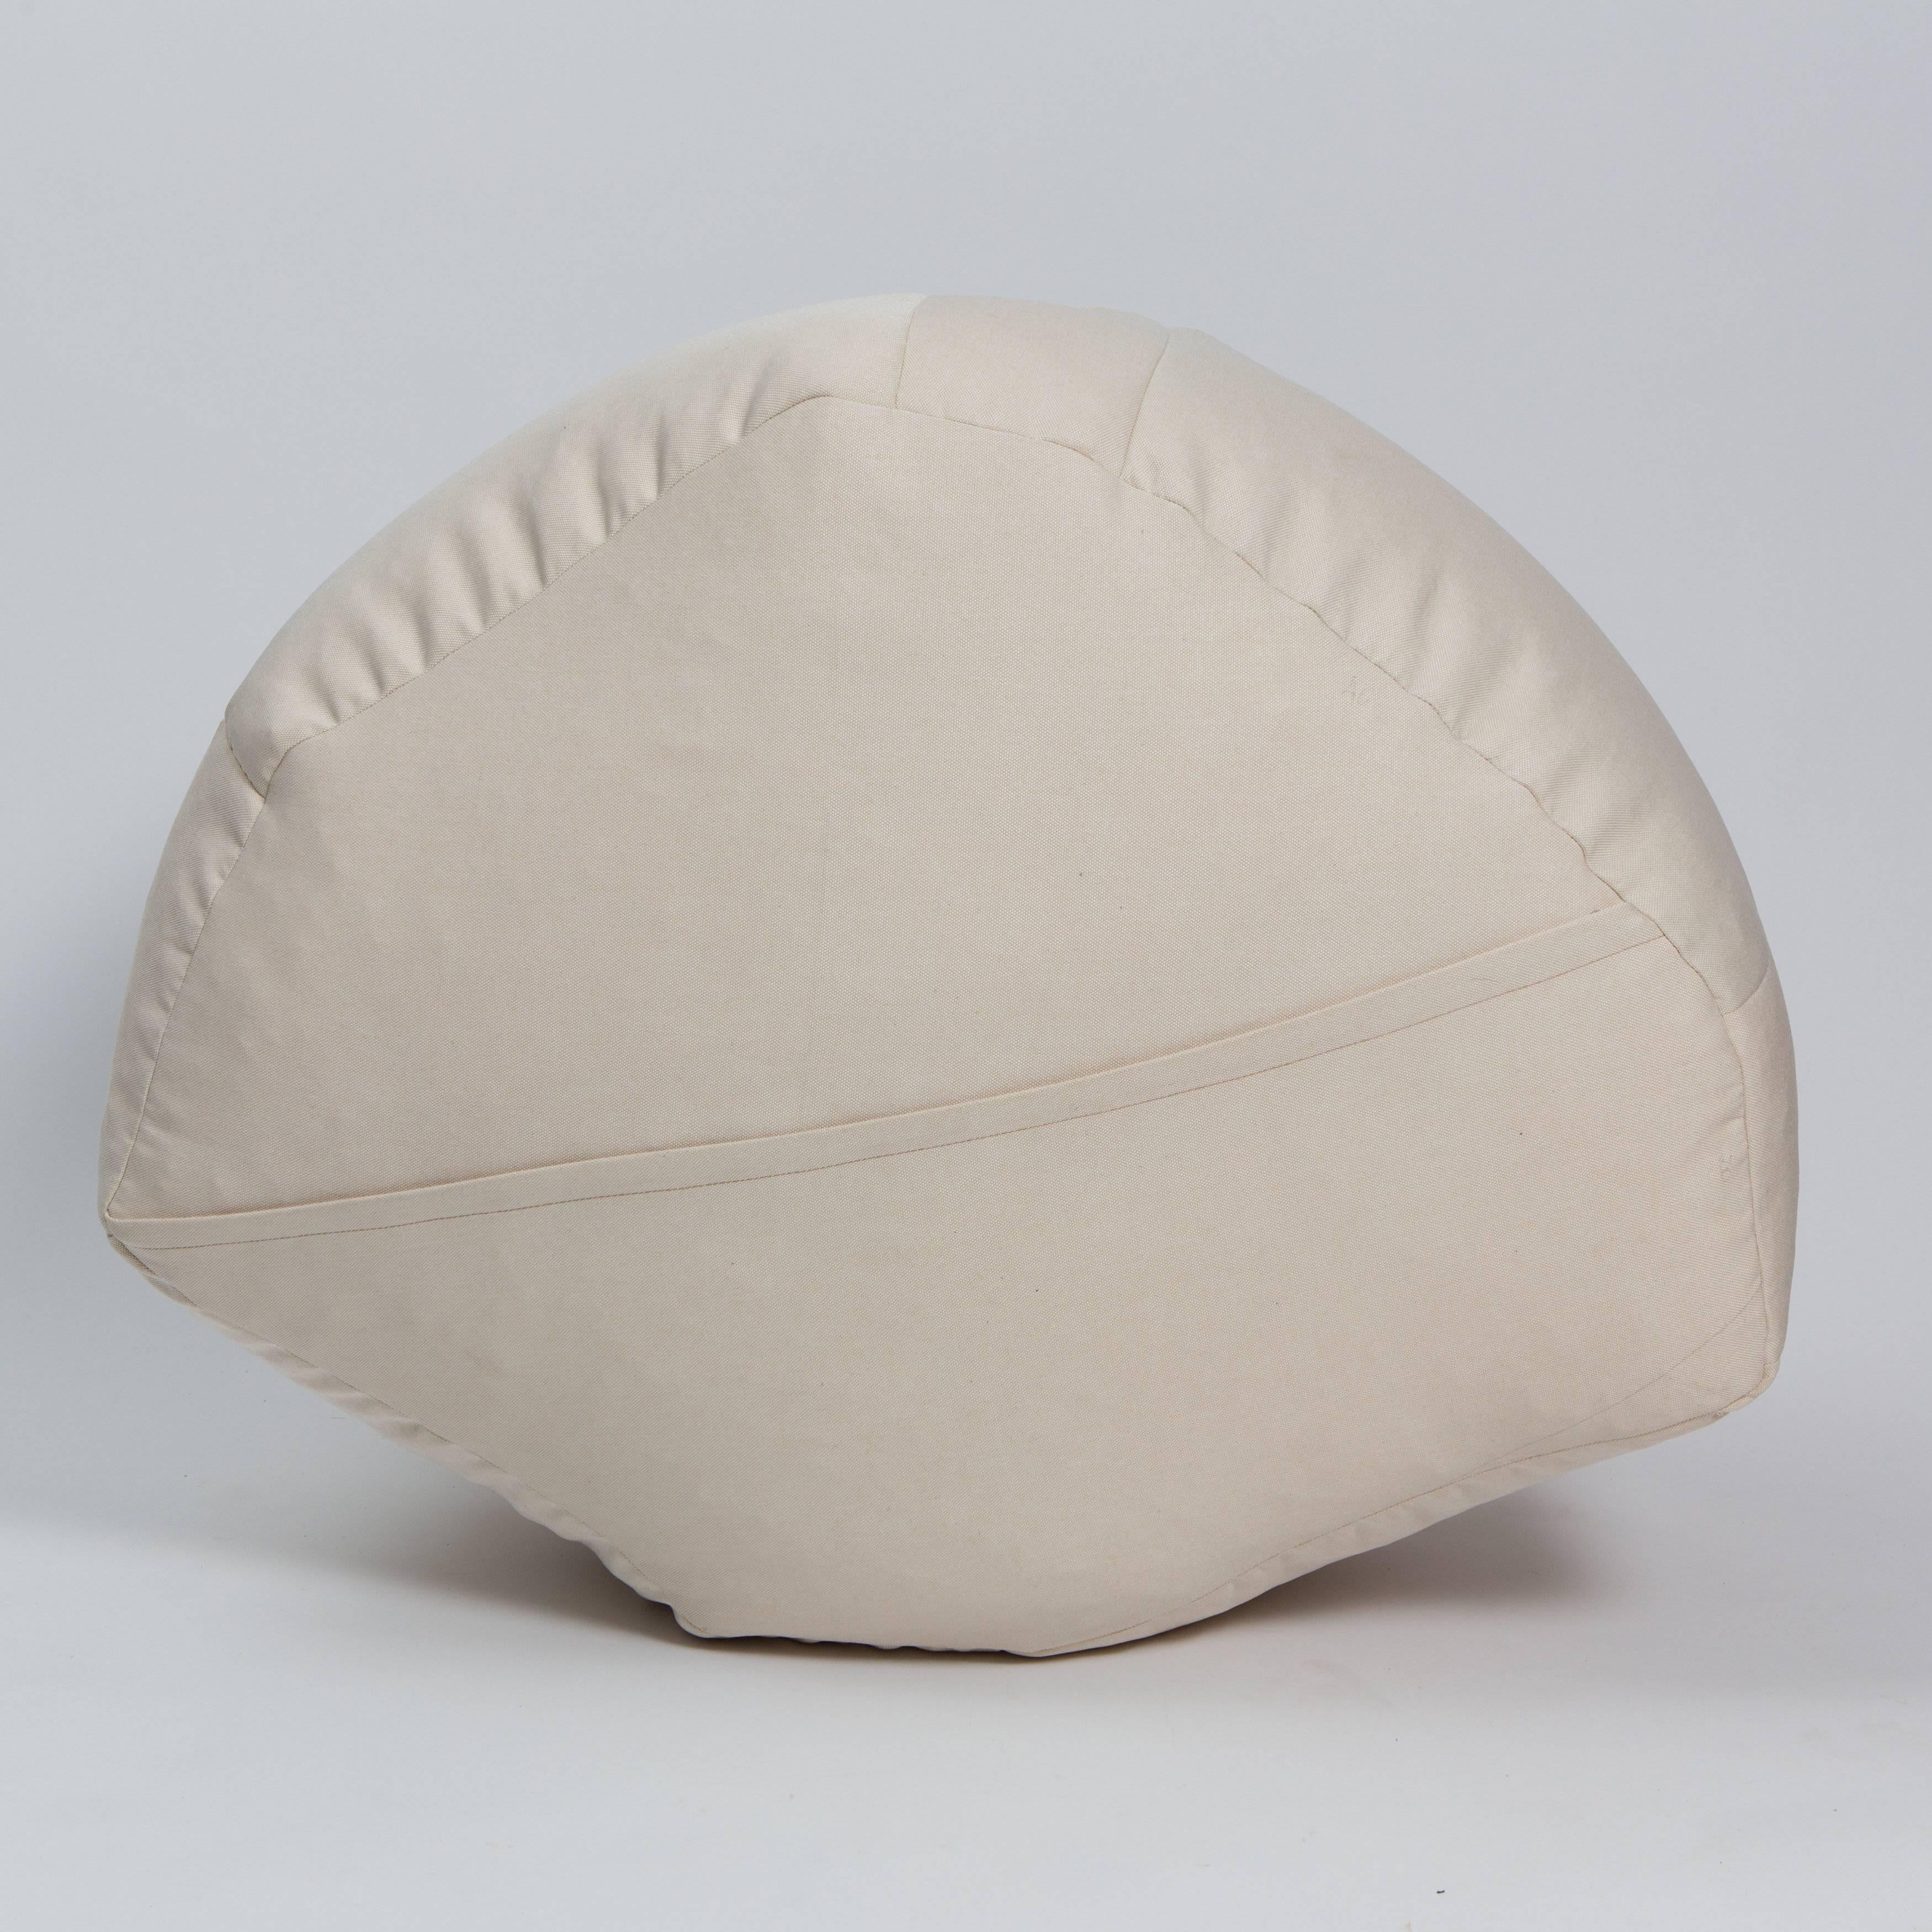 Geode Pouf by Gabriela Valenzuela-Hirsch and Barbara Cuevas In Excellent Condition For Sale In New York, NY